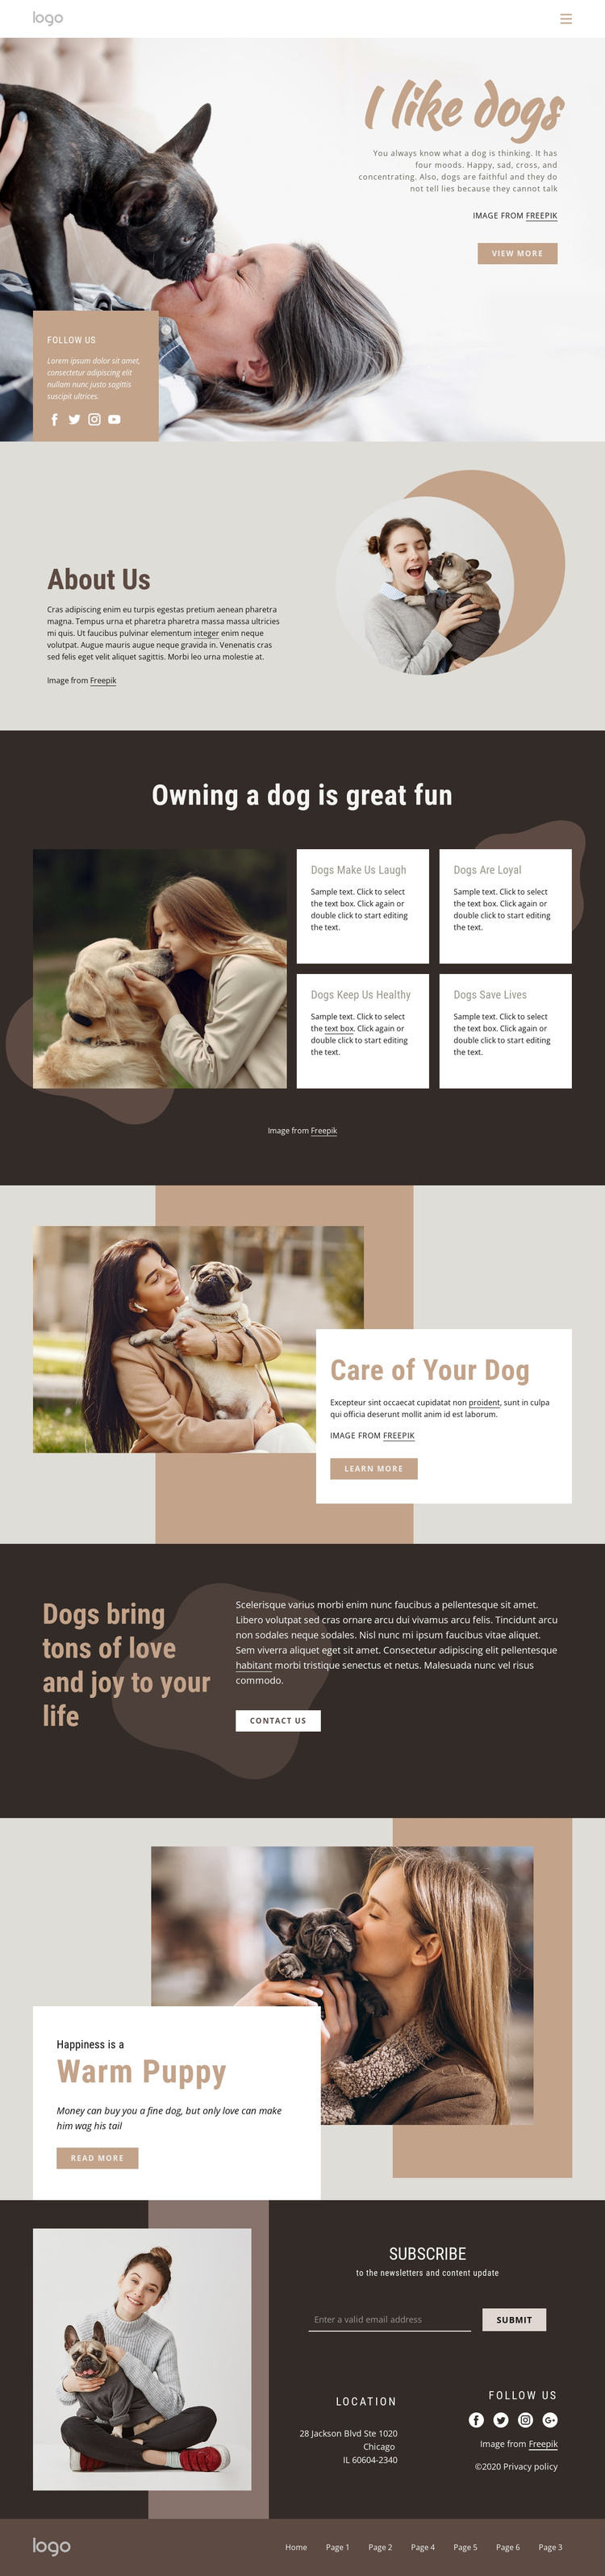 All about dogs Joomla Template